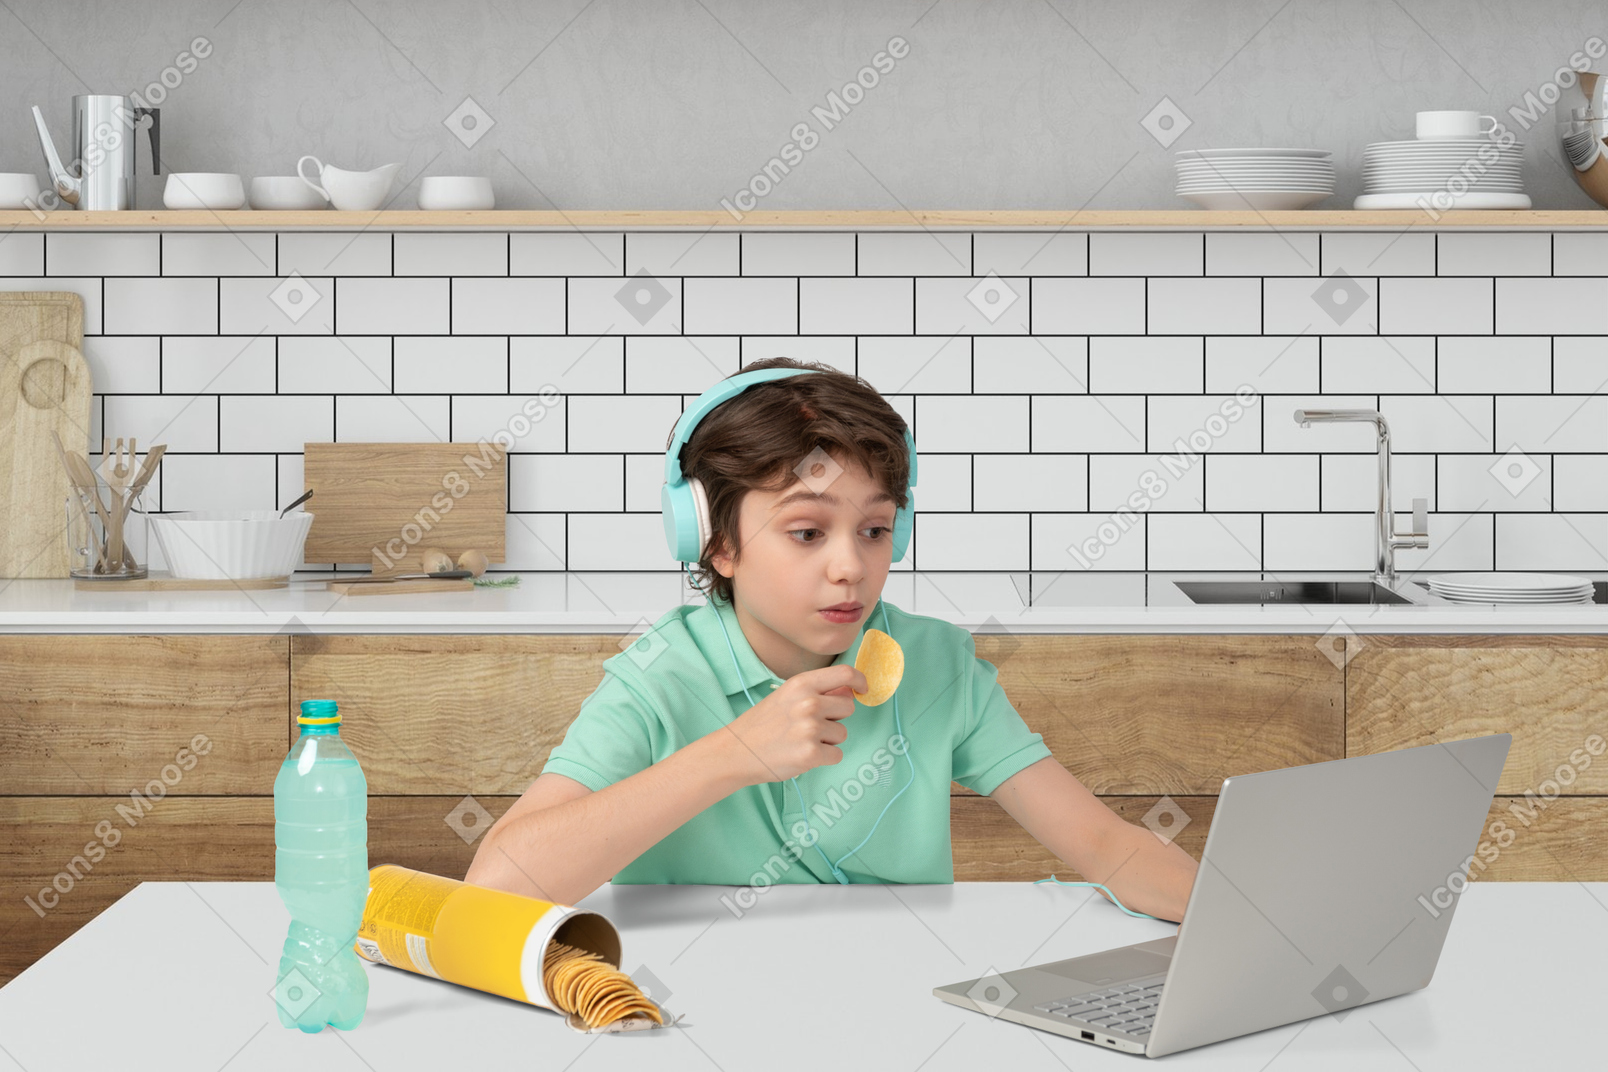 A young boy sitting at a table with a laptop